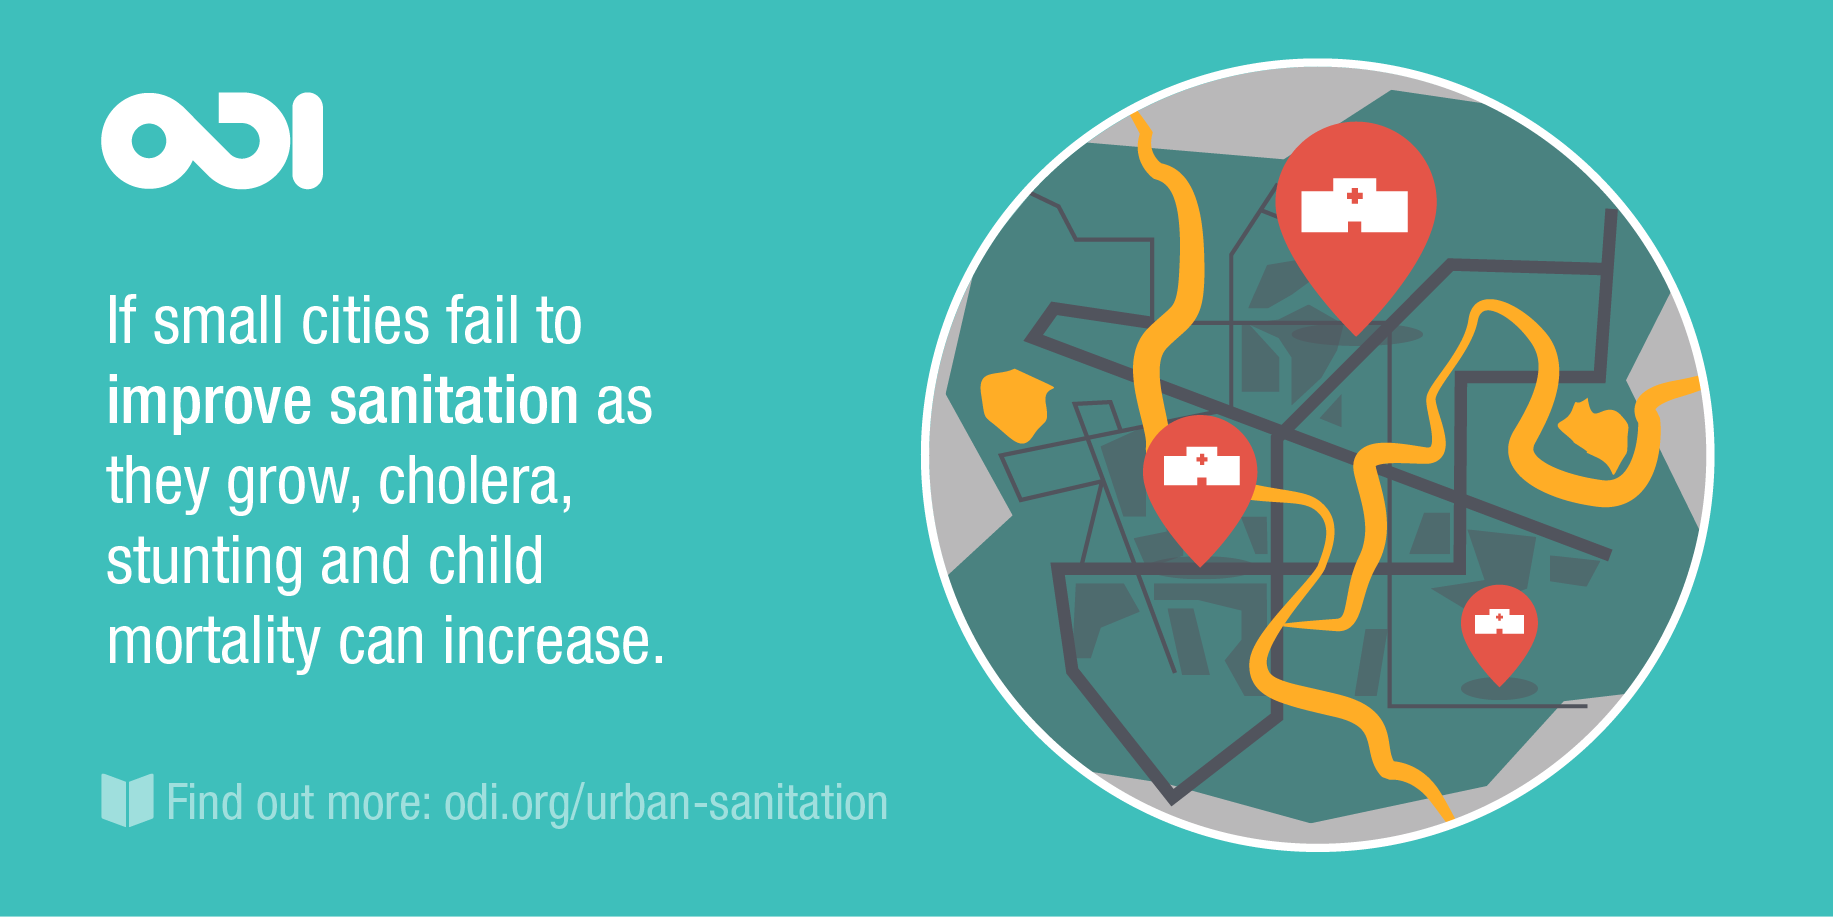 If small cities fail to improve sanitationa s they grow, cholera, stunting and child mortality can increase.